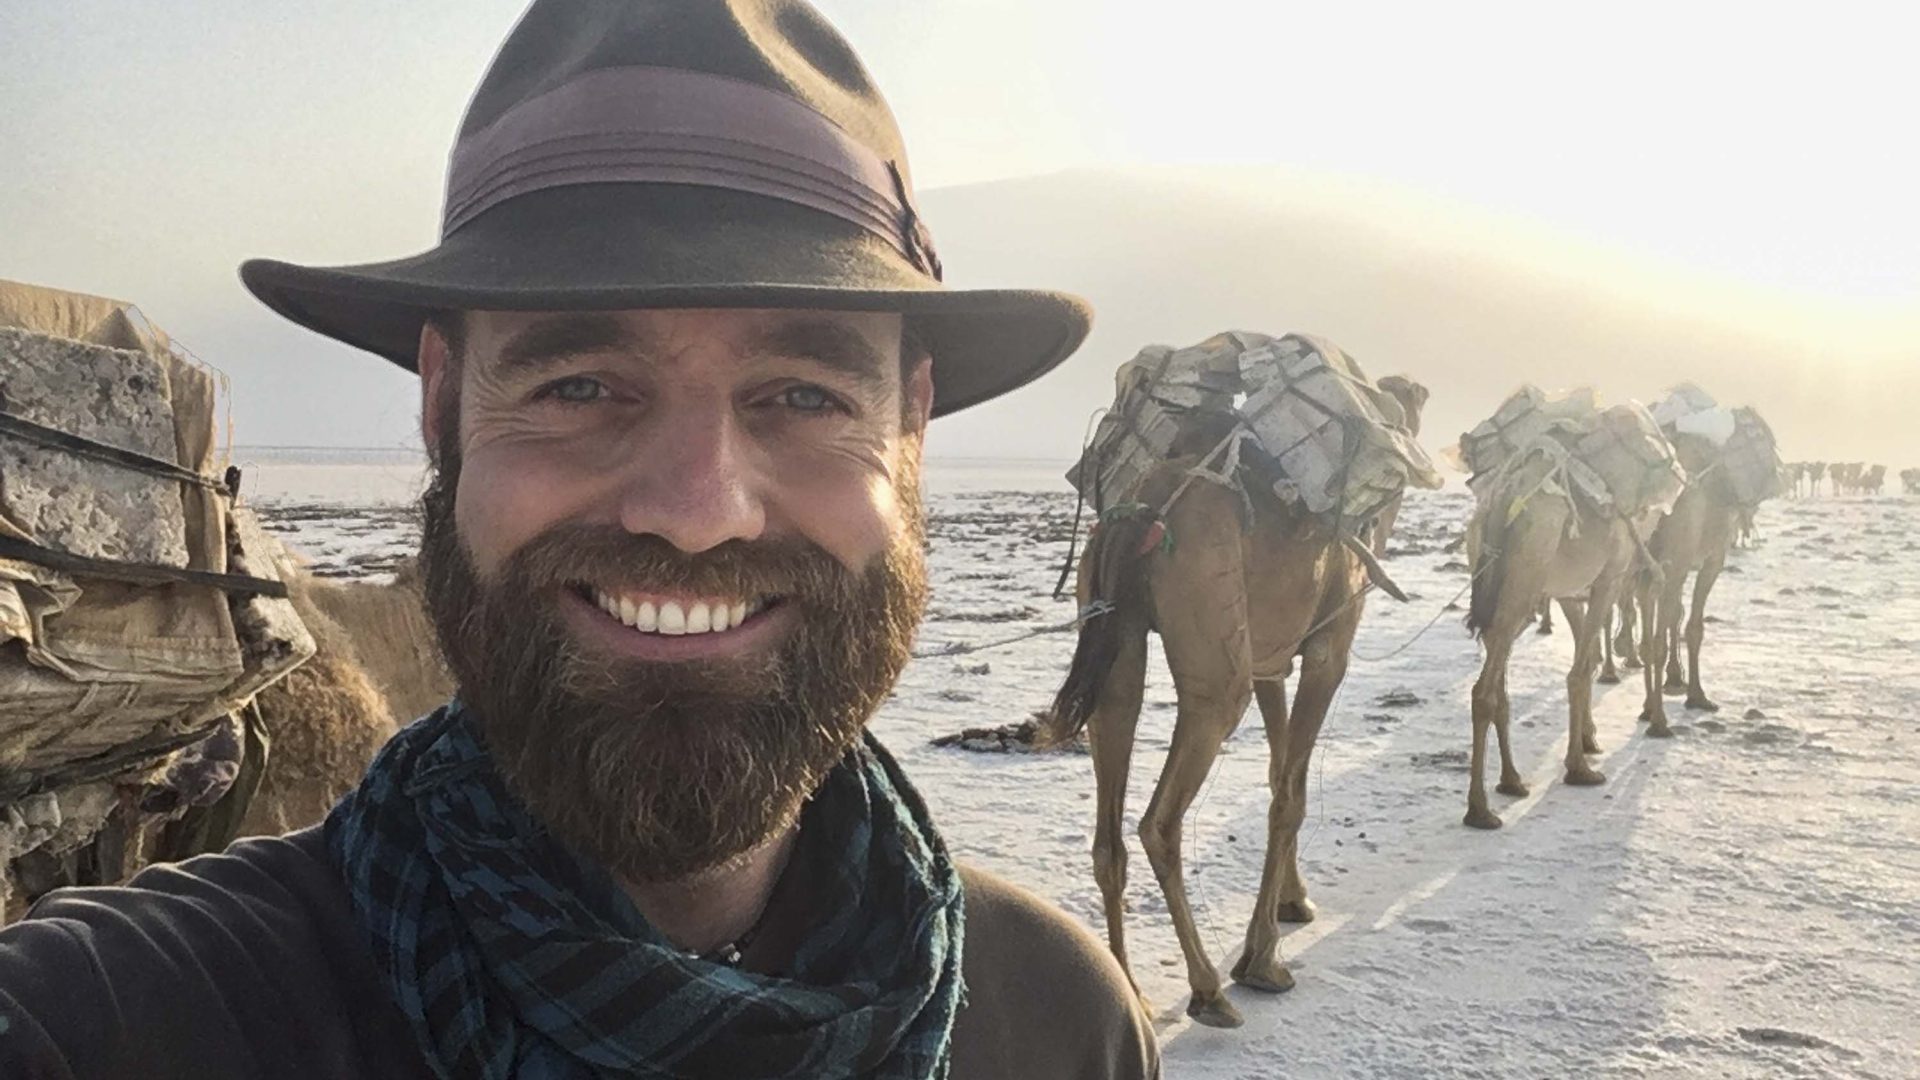 A selfie of Thor in the foreground with camels walking behind him in the background.